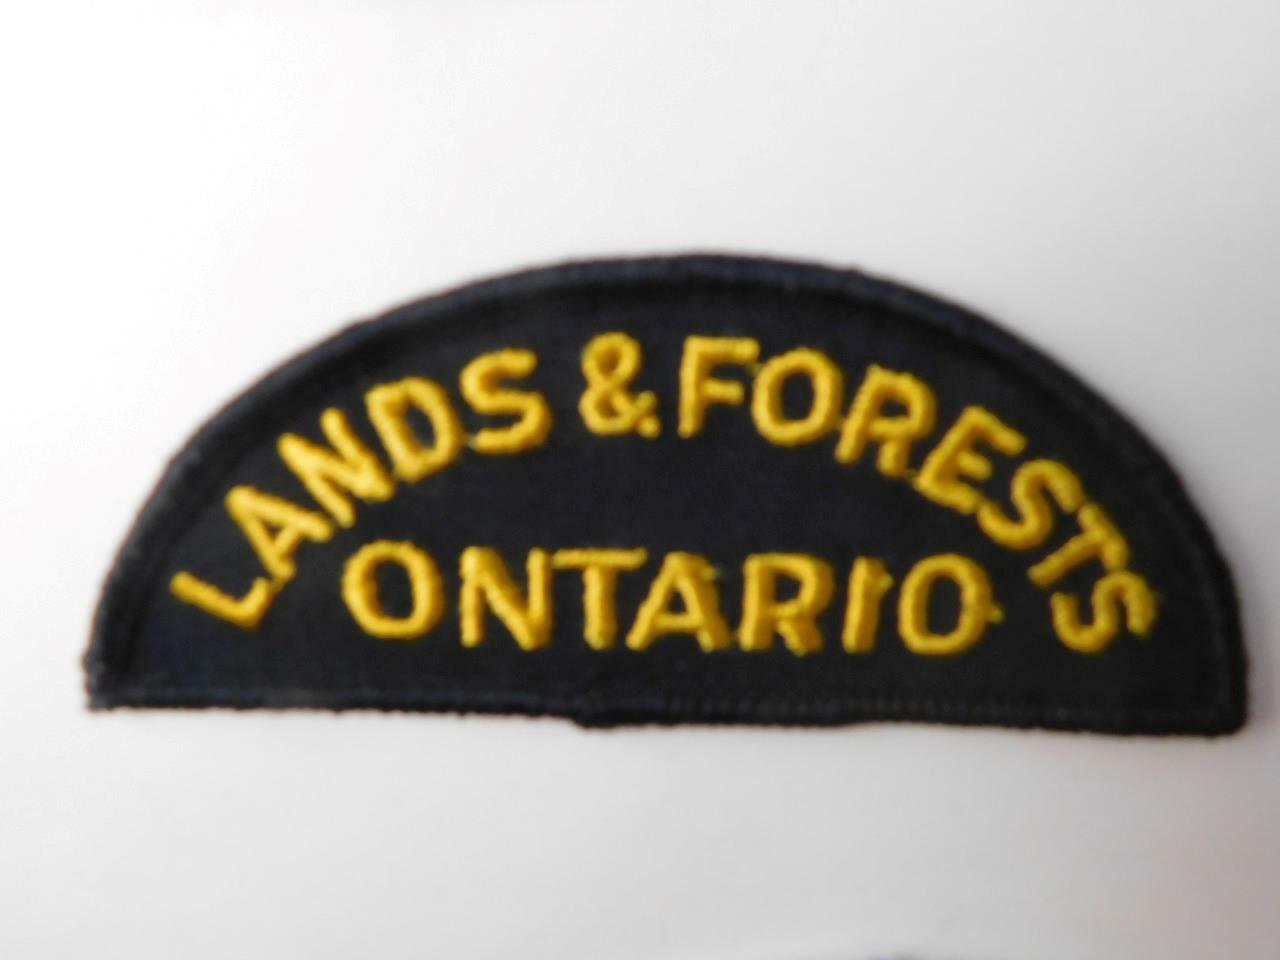 Ontario Lands & Forests Game Warden Vintage Patch Badge Canada  Collector